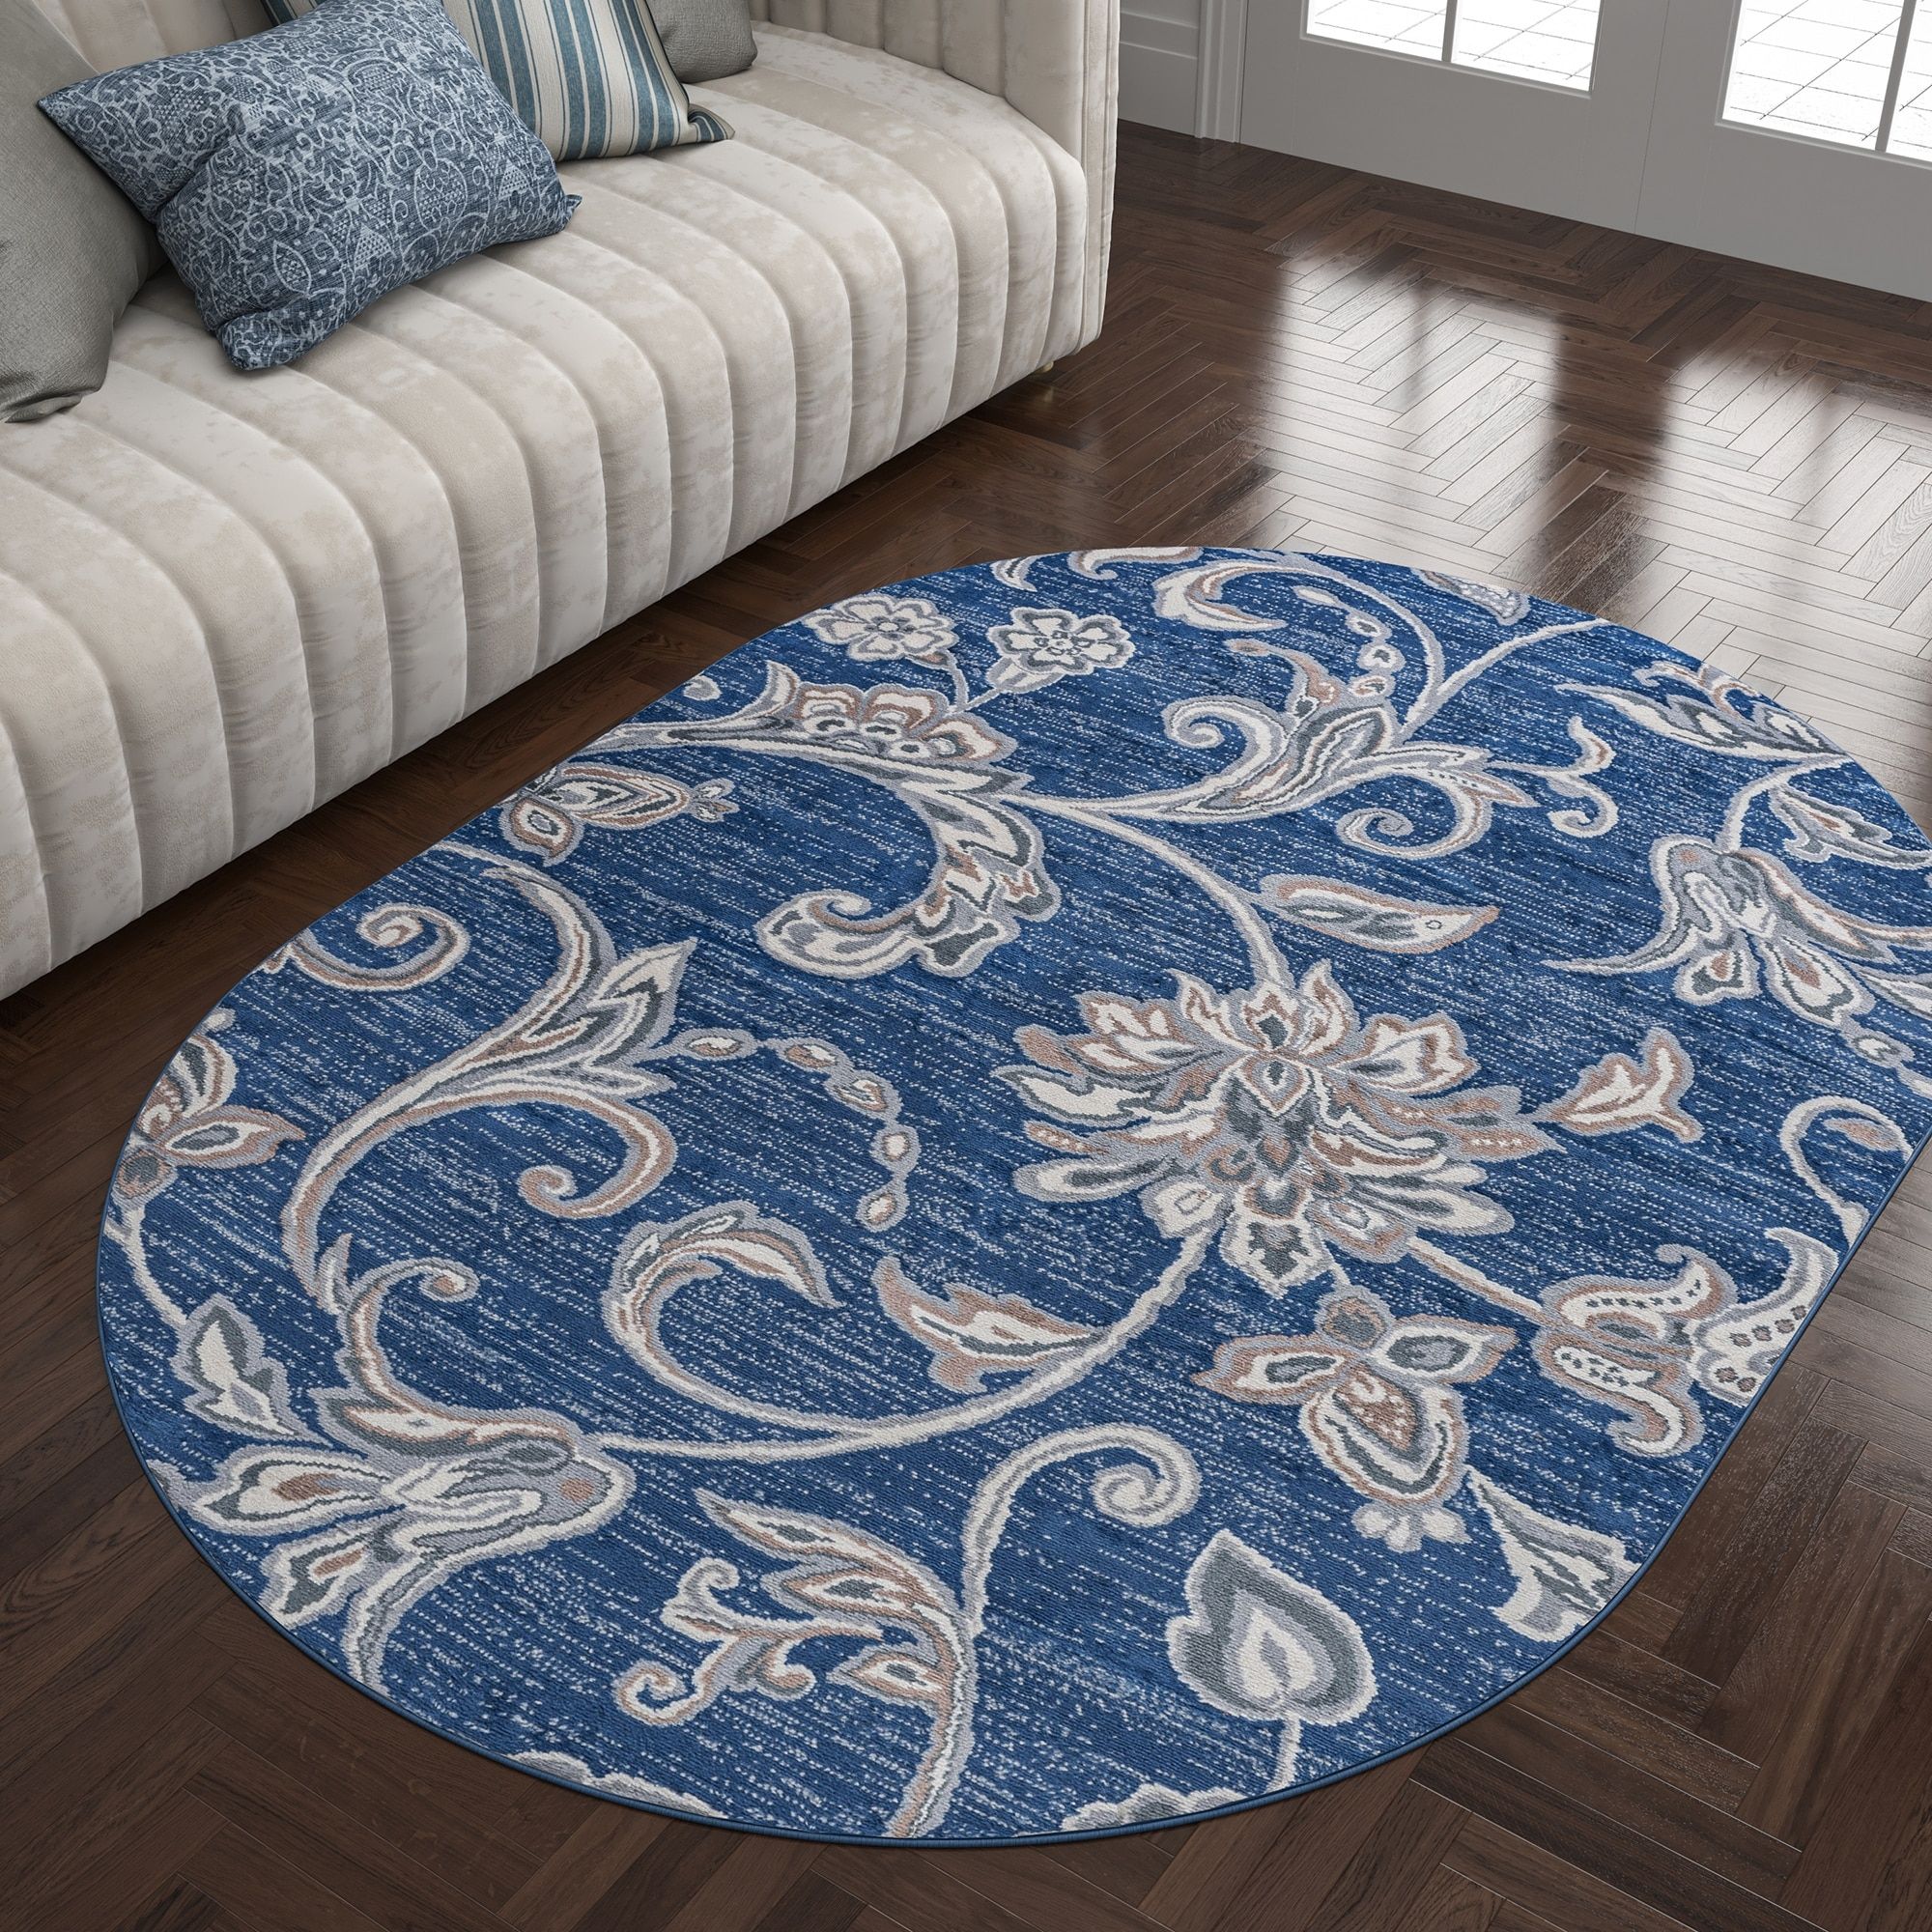 Alise Rugs Carrington Transitional Floral & Botanical Indoor Area Rug Navy  5'3'' X 7'3'' Oval Floral & Botanical 5' X 8' Indoor Living Room, Bedroom,  – Walmart Intended For Botanical Oval Rugs (View 5 of 15)